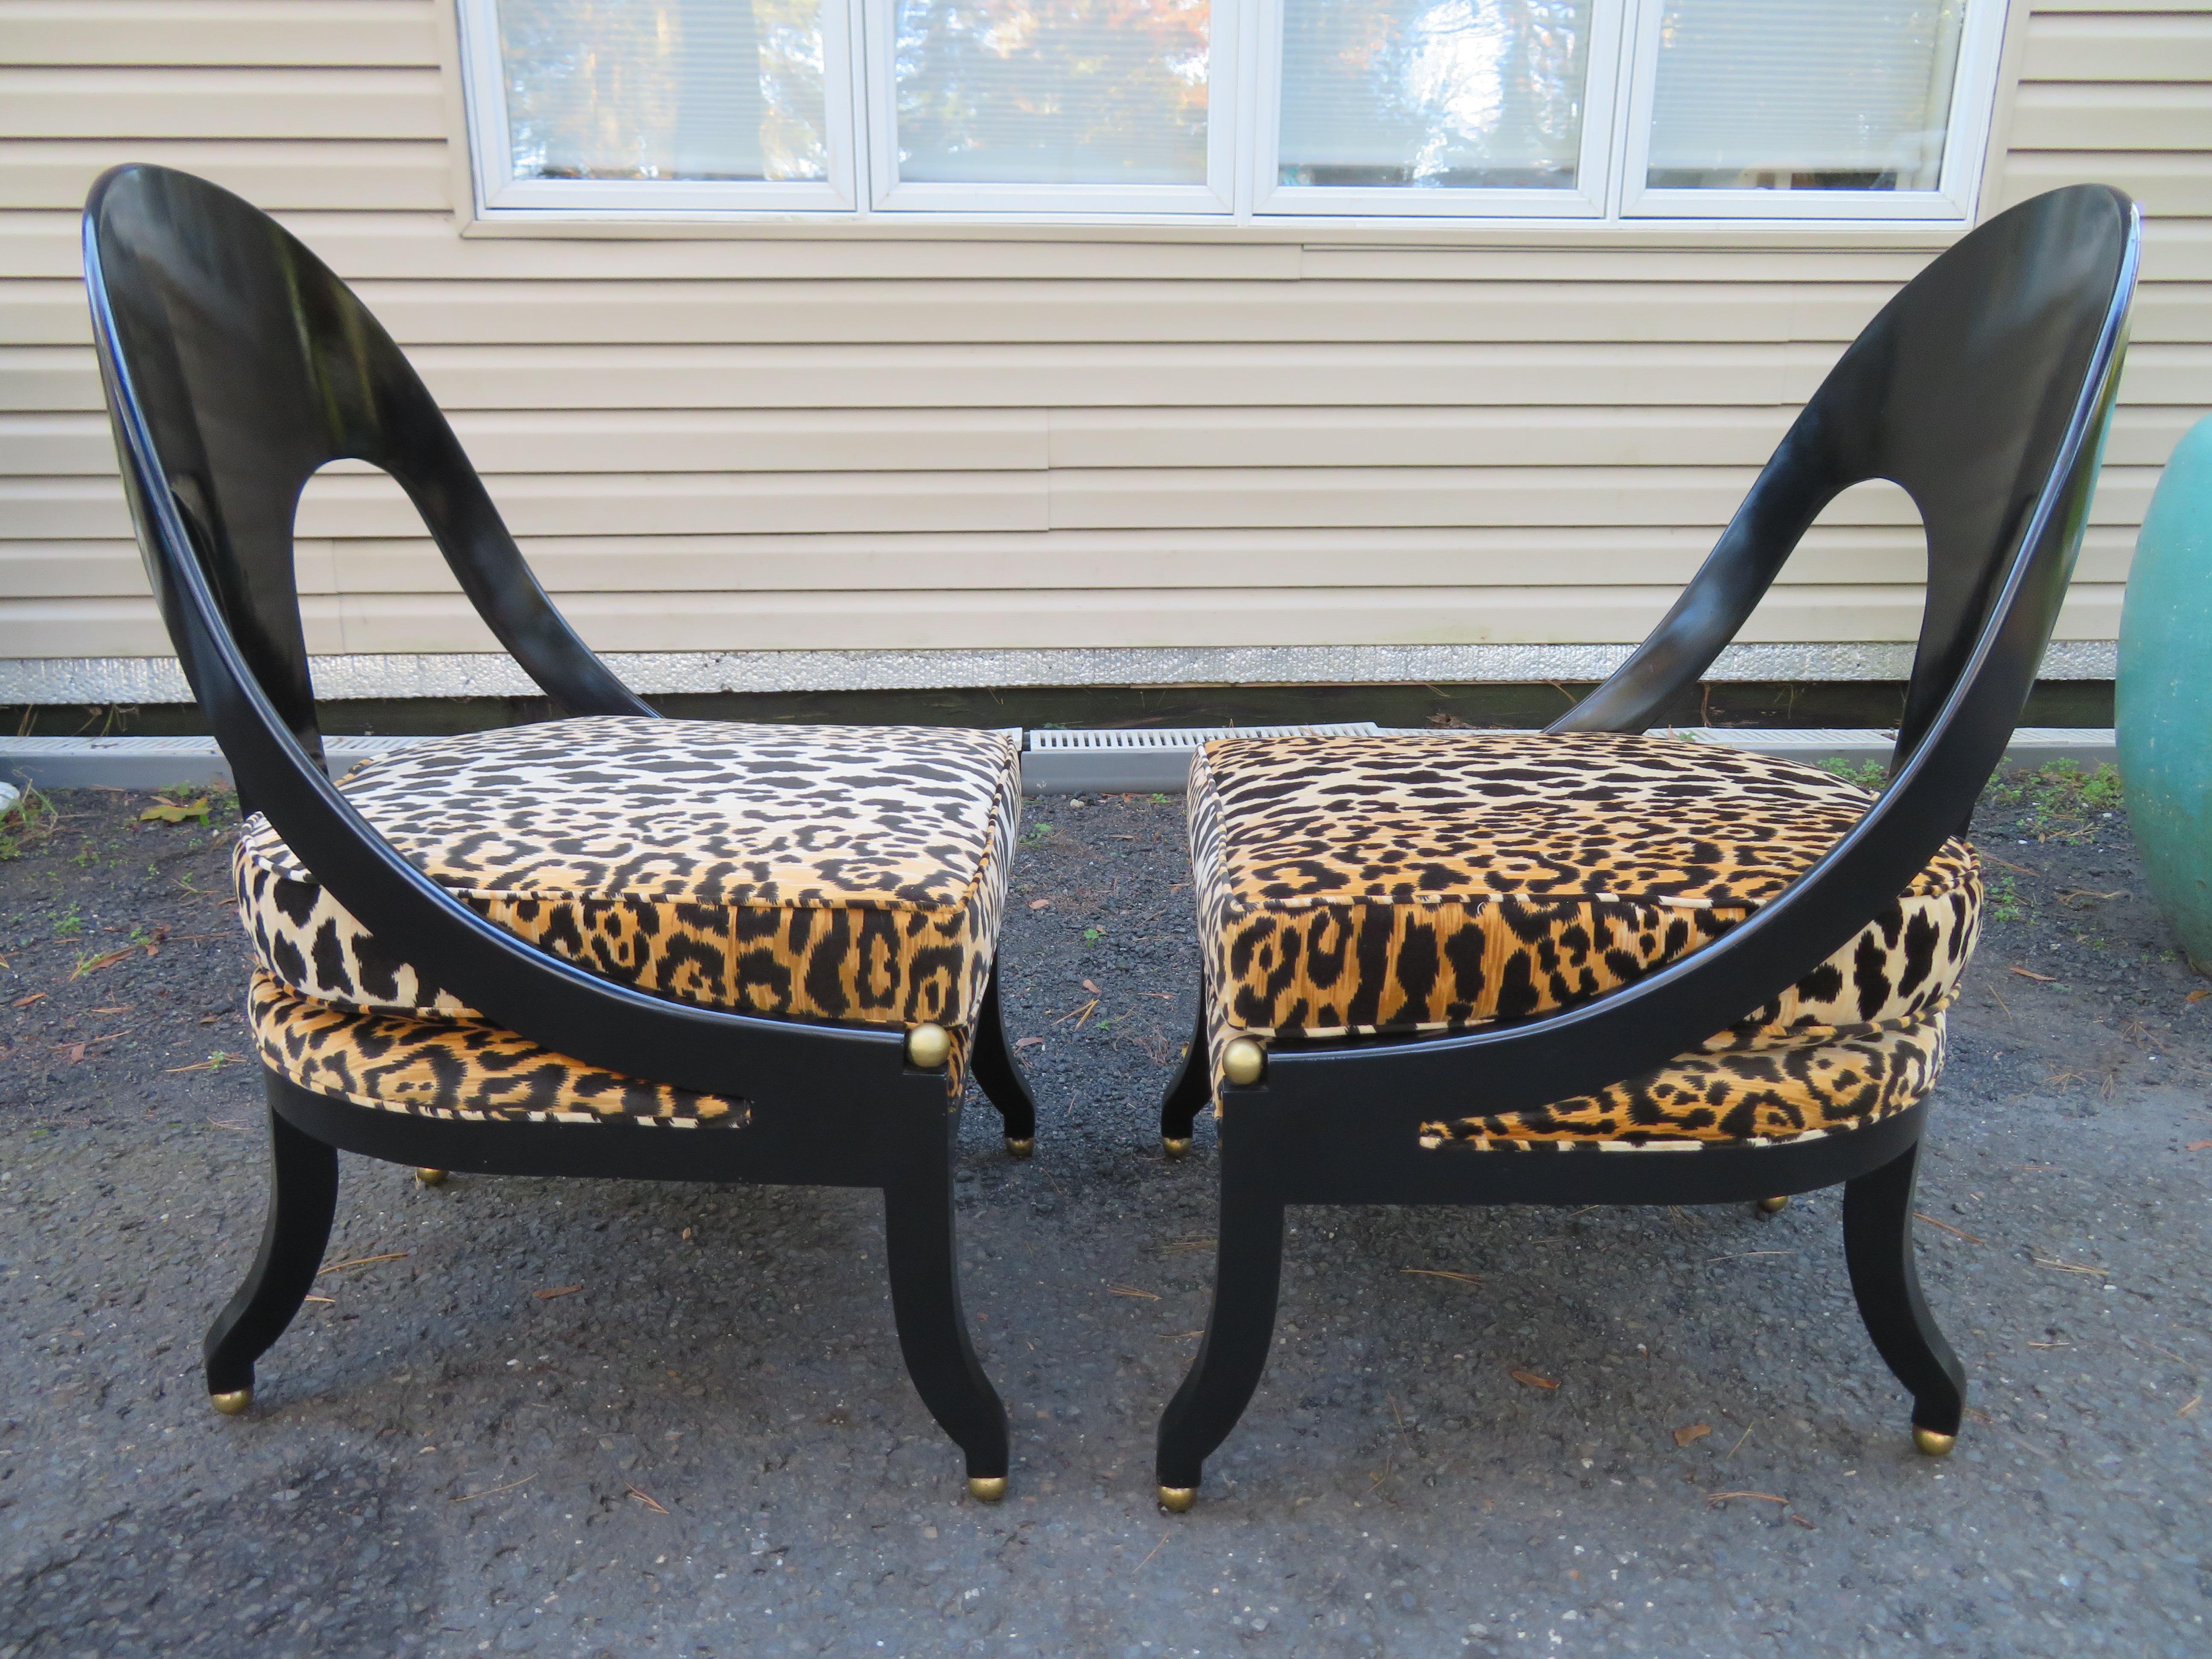 Wonderful pair of Michael Taylor for Baker spoon back neoclassical chairs. Wow, these vintage chairs are stunning in person, we love the original ebonized black finish in very nice condition. These chairs have been reupholstered in a wonderful